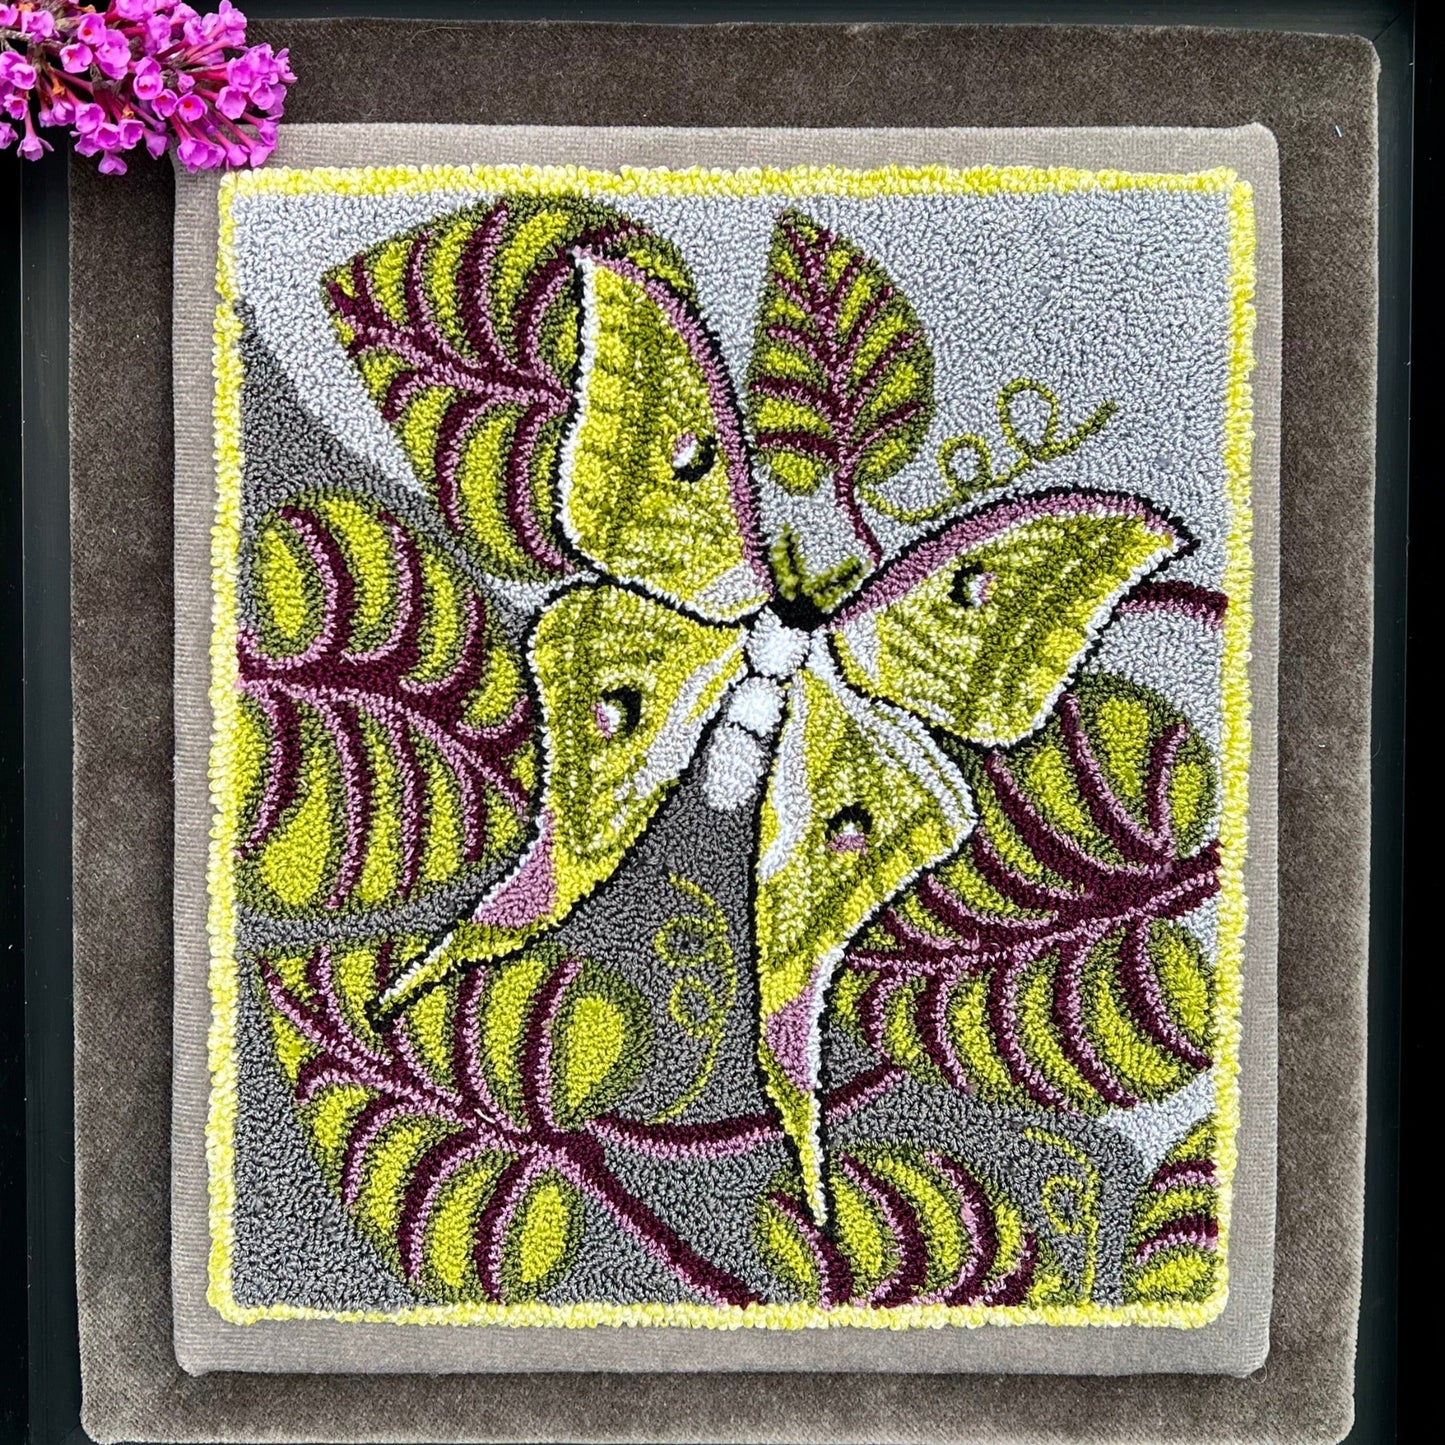 Luna Moth- Needle Punch Pattern by Orphaned Wool, Copyright © 2023 Kelly Kanyok. This pattern of a Luna Moth in the leaves is available as a Paper or Cloth pattern.